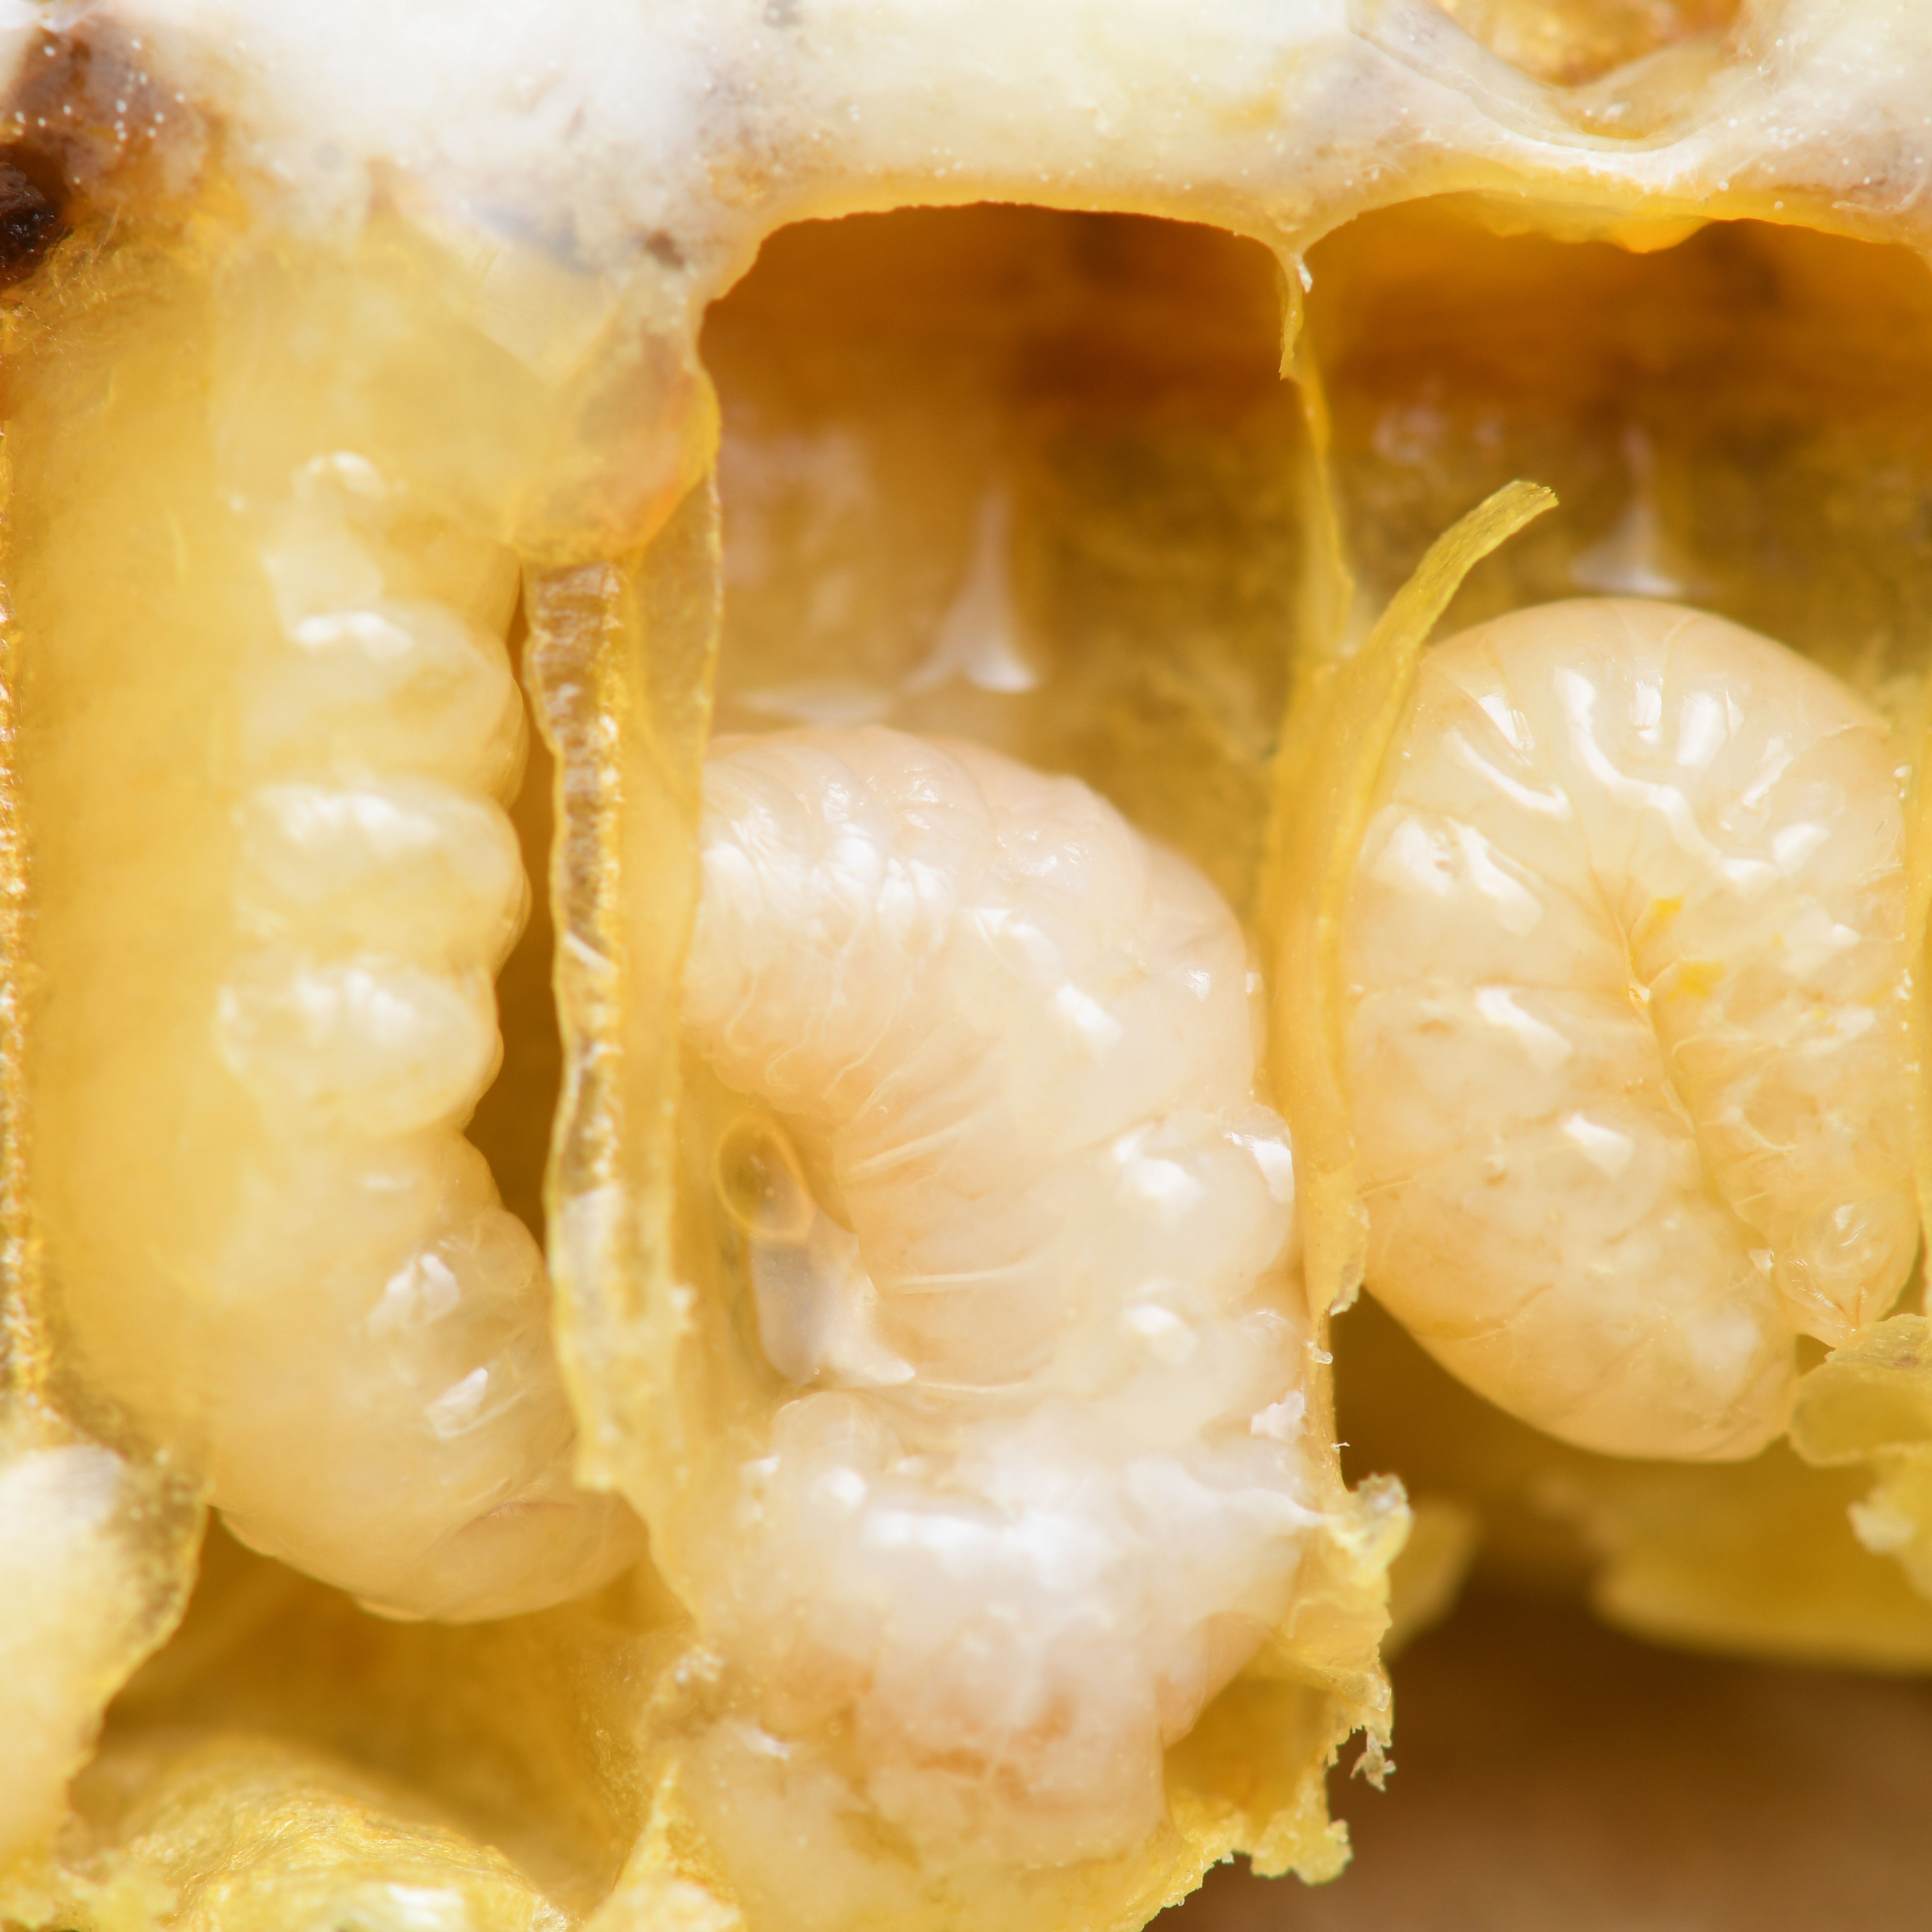 Honey bee larva in the hive observation